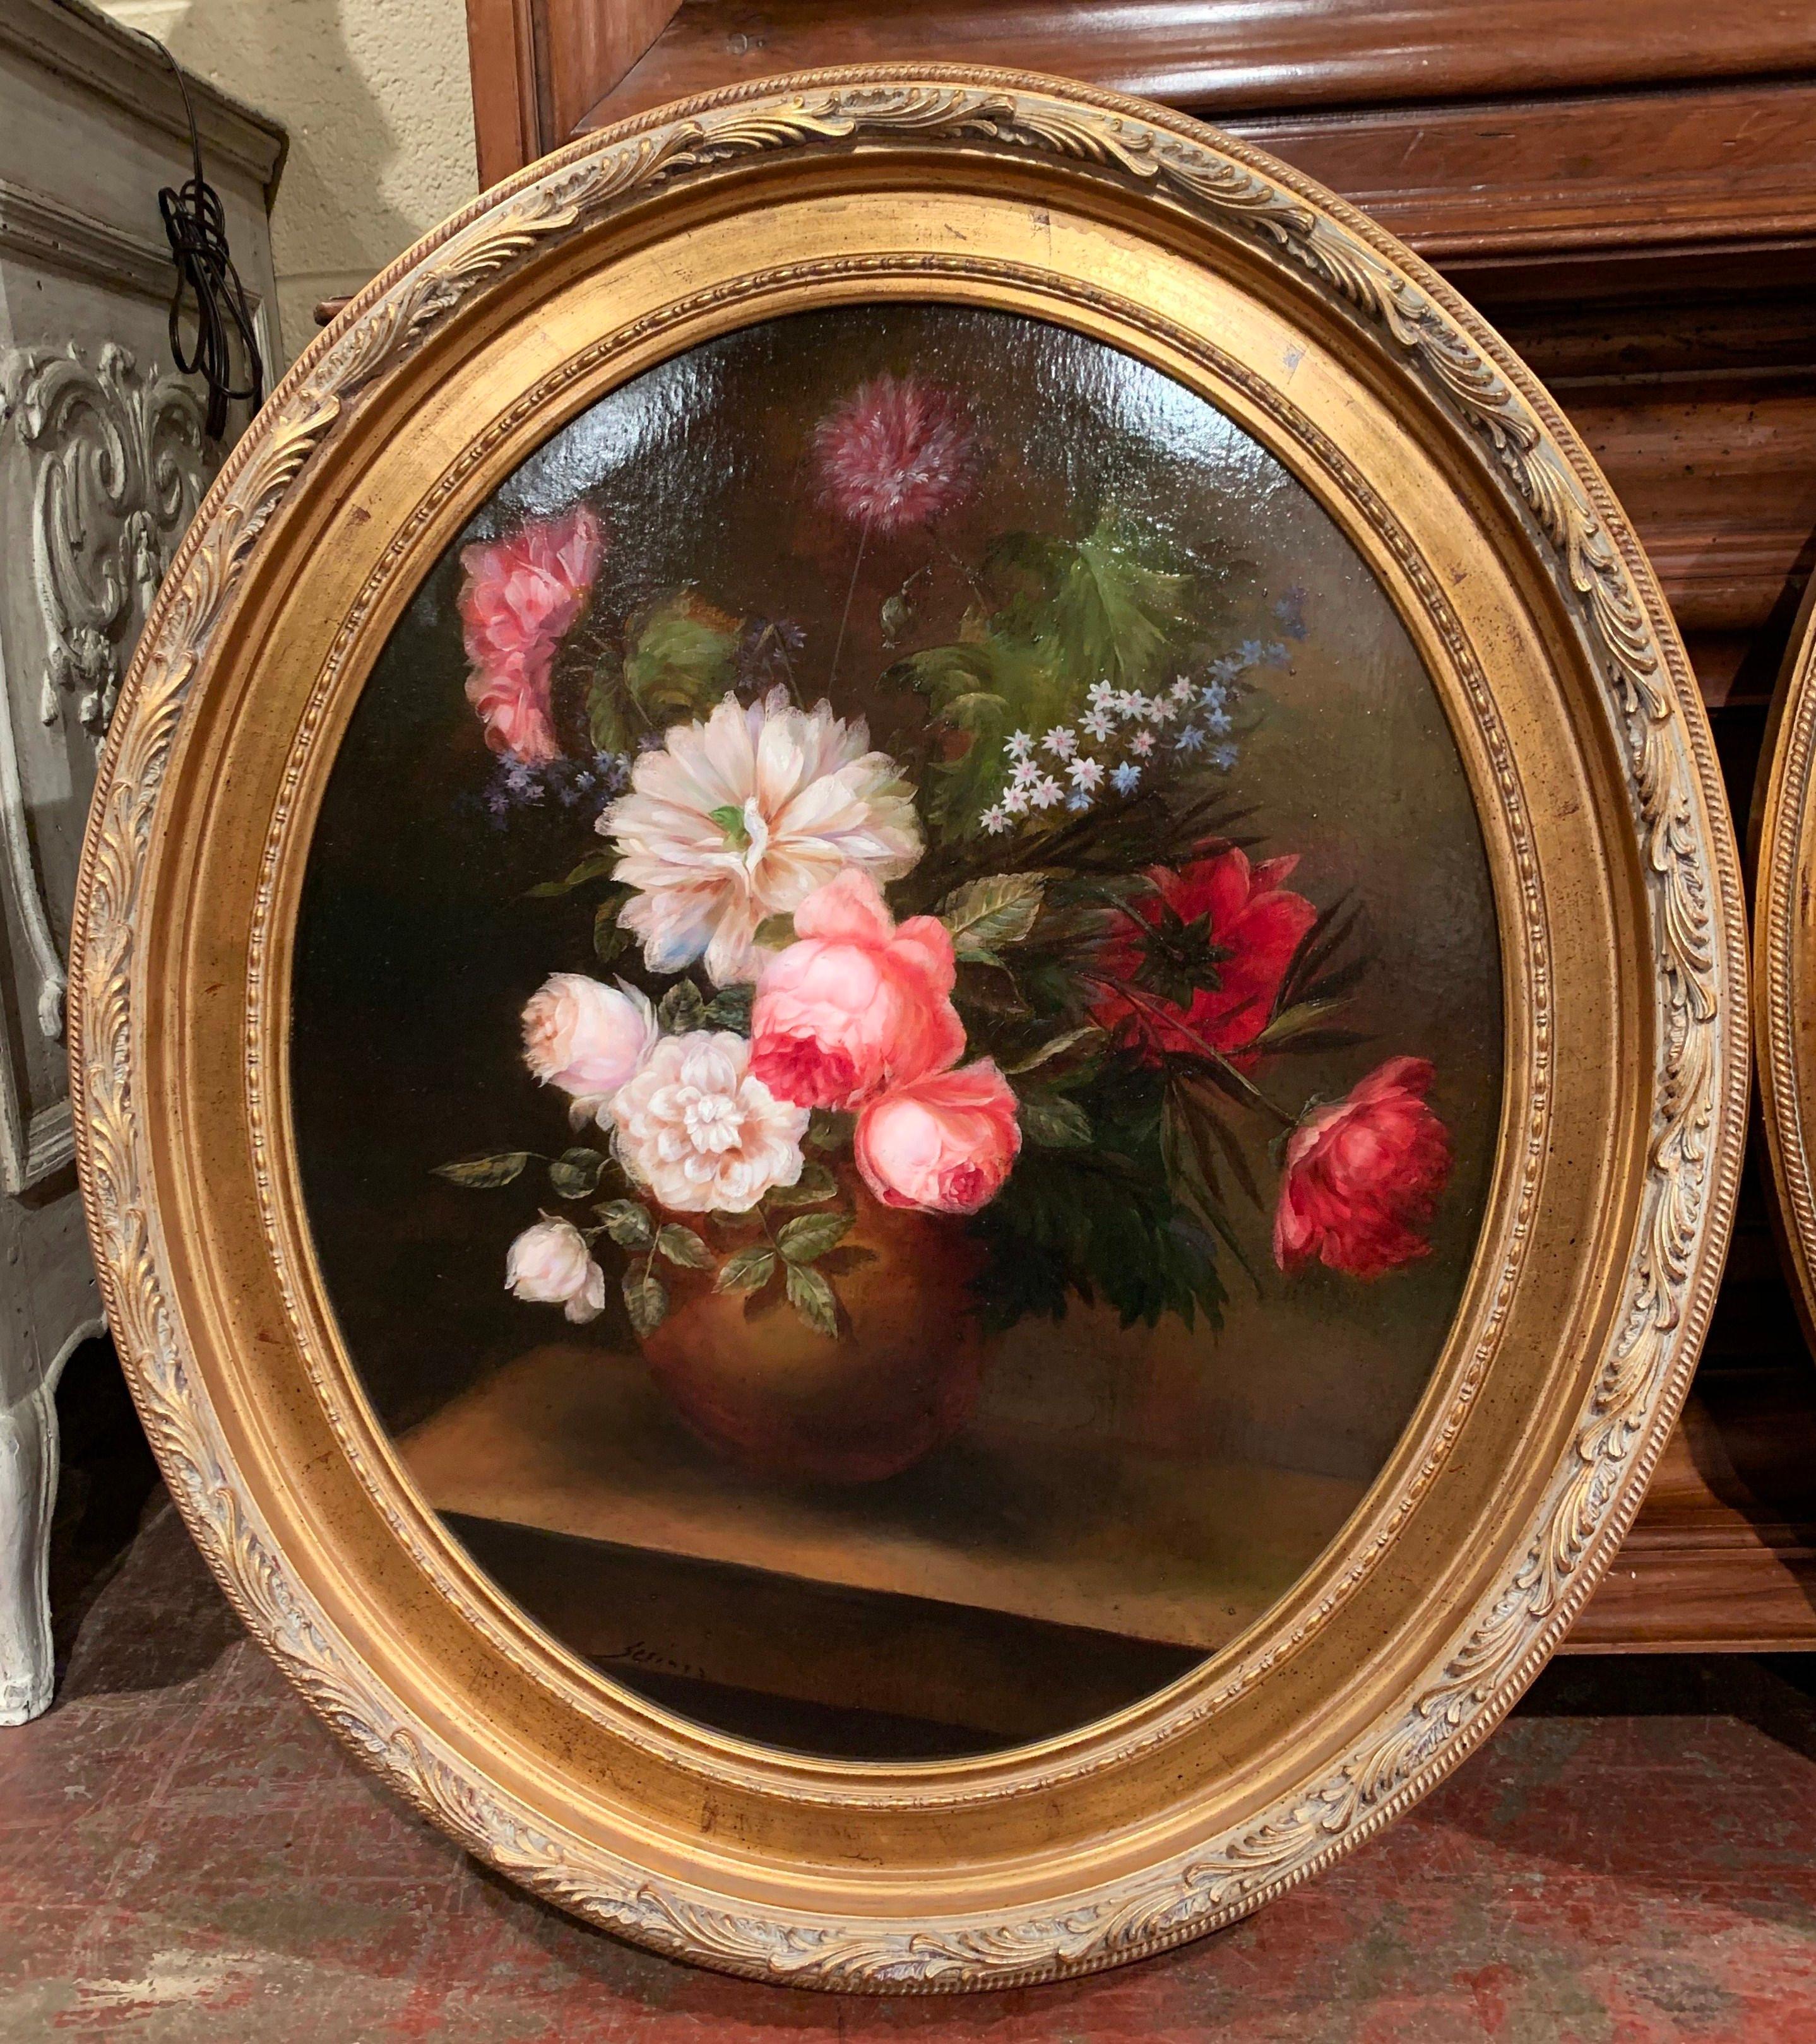 Invite color into your home with this elegant pair of vintage oil on canvas paintings from France. Set in carved oval gilt frame, each canvas features colorful hand painted floral arrangements on a dark background. The traditional paintings with